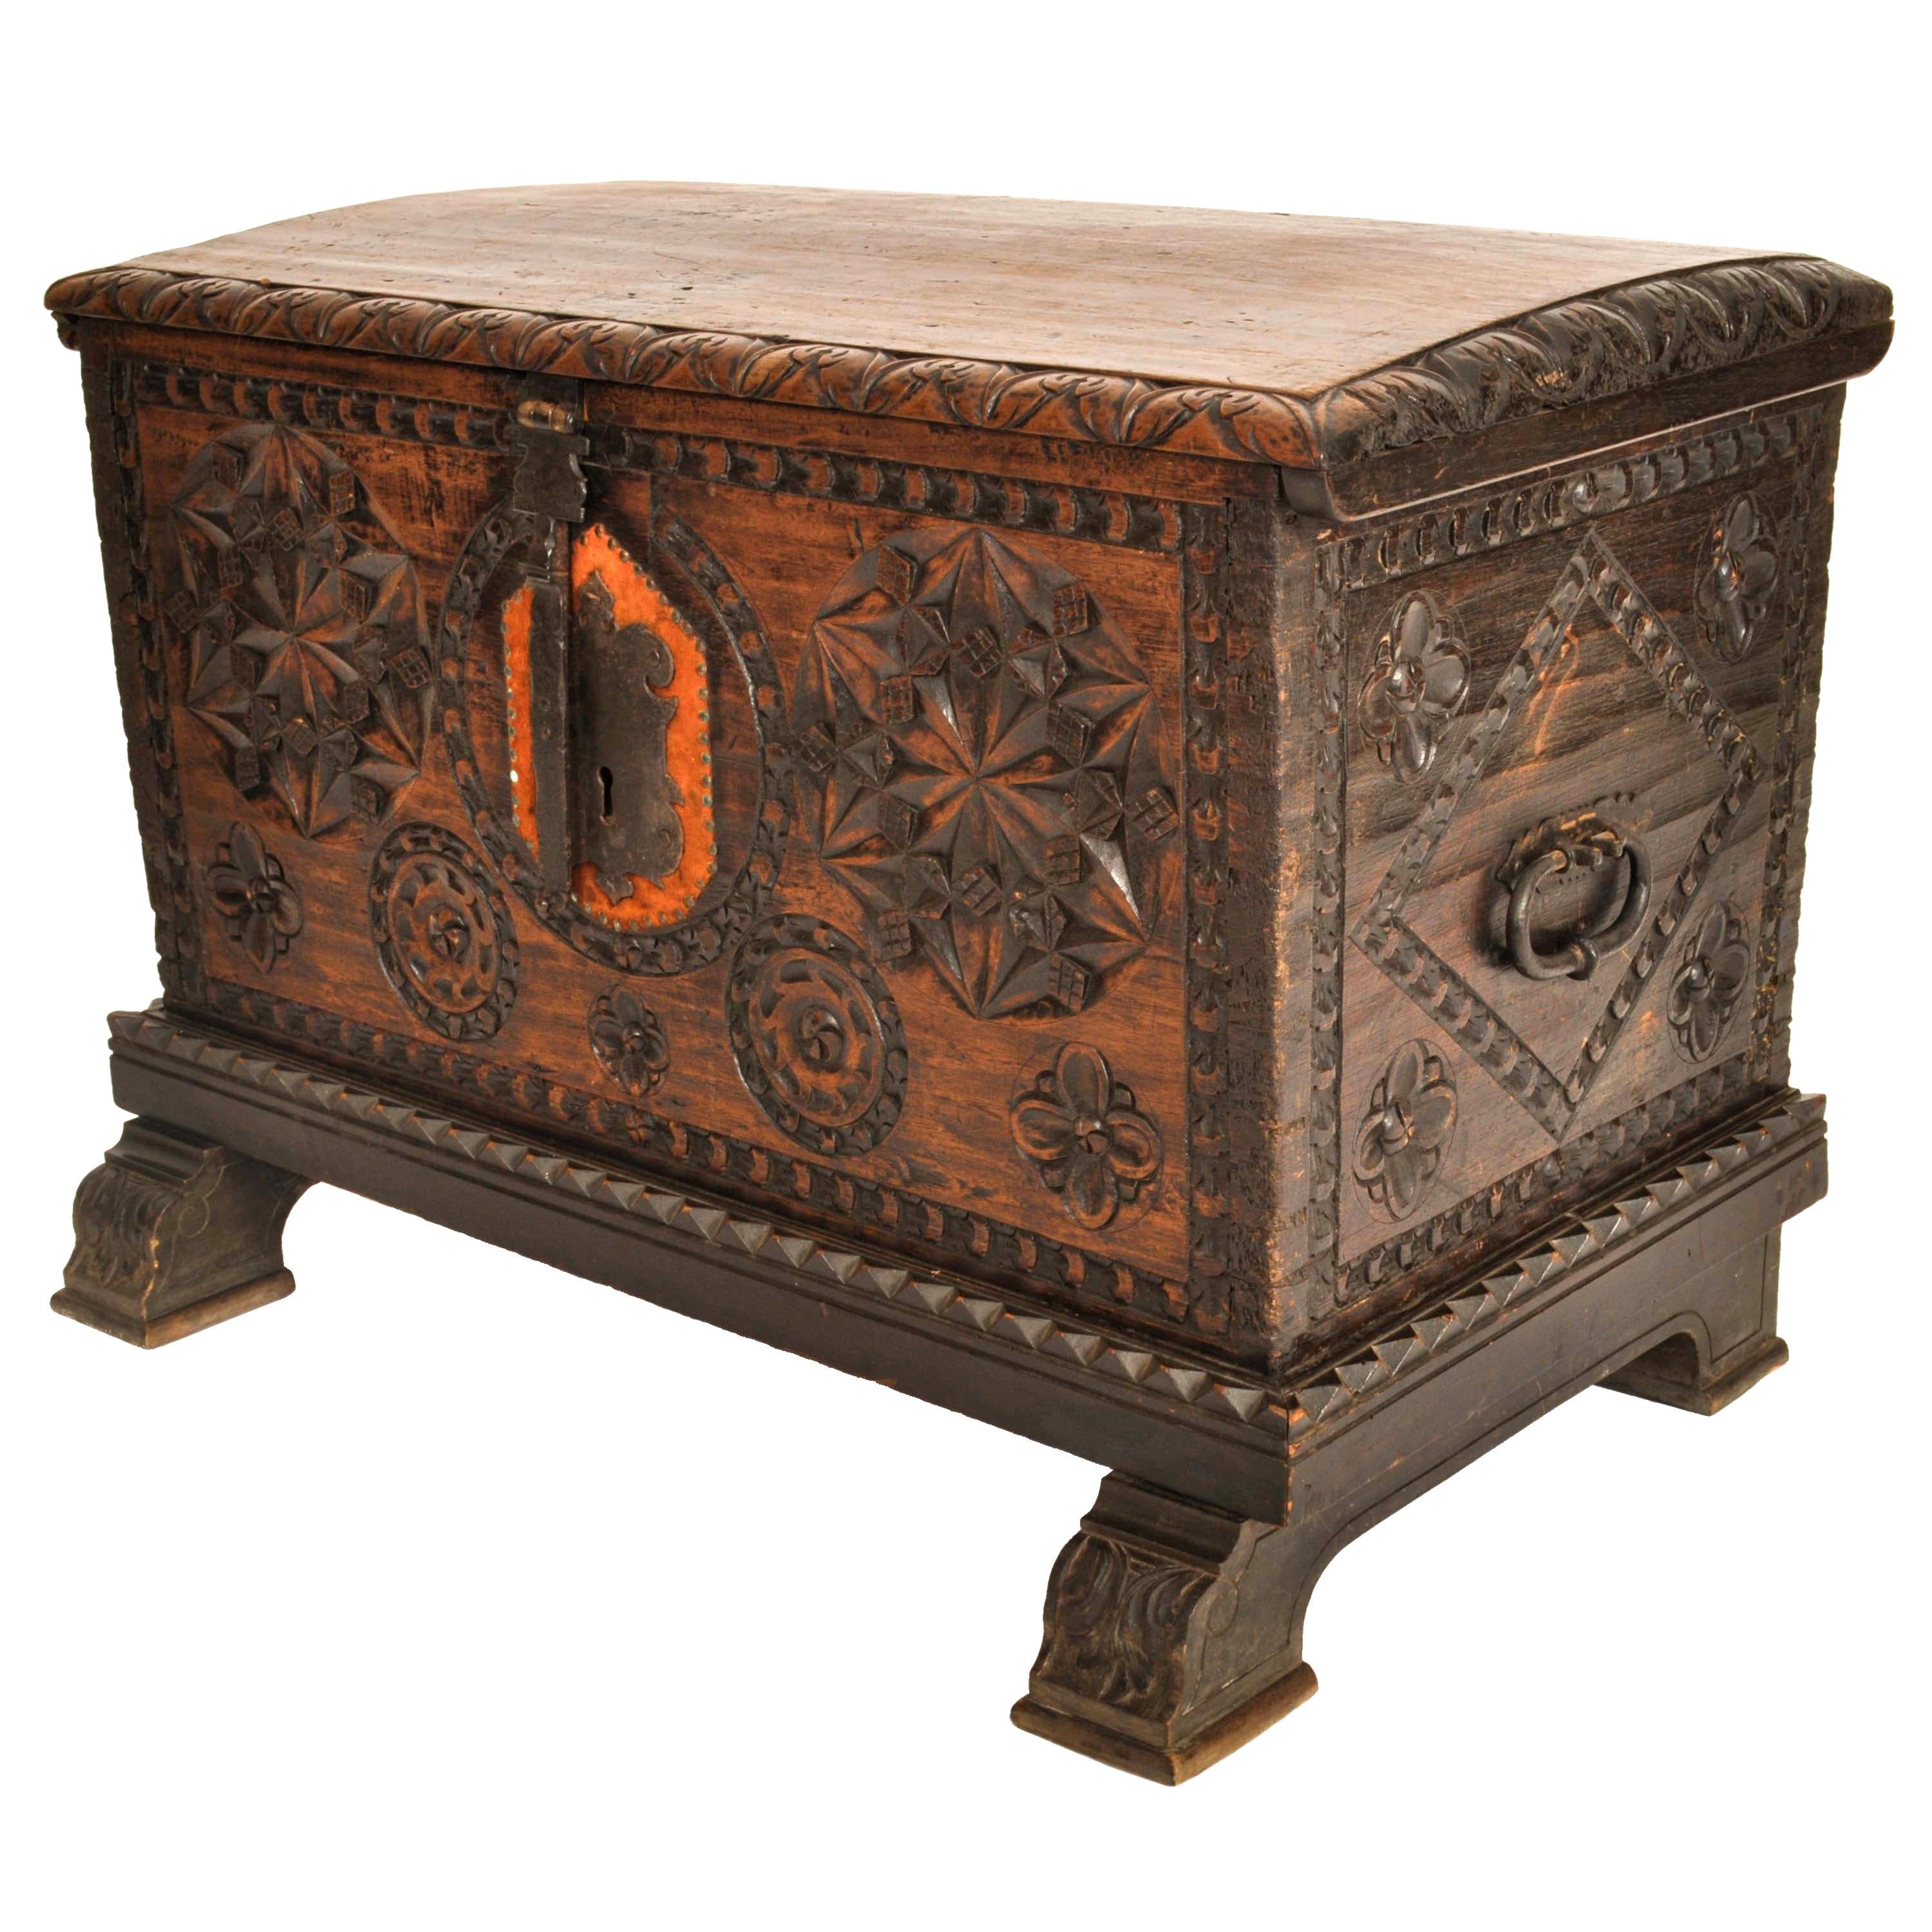 Antique Scandinavian Pine Baroque Folk Art Carved Dowry Chest Trunk Coffer 1780 In Good Condition For Sale In Portland, OR